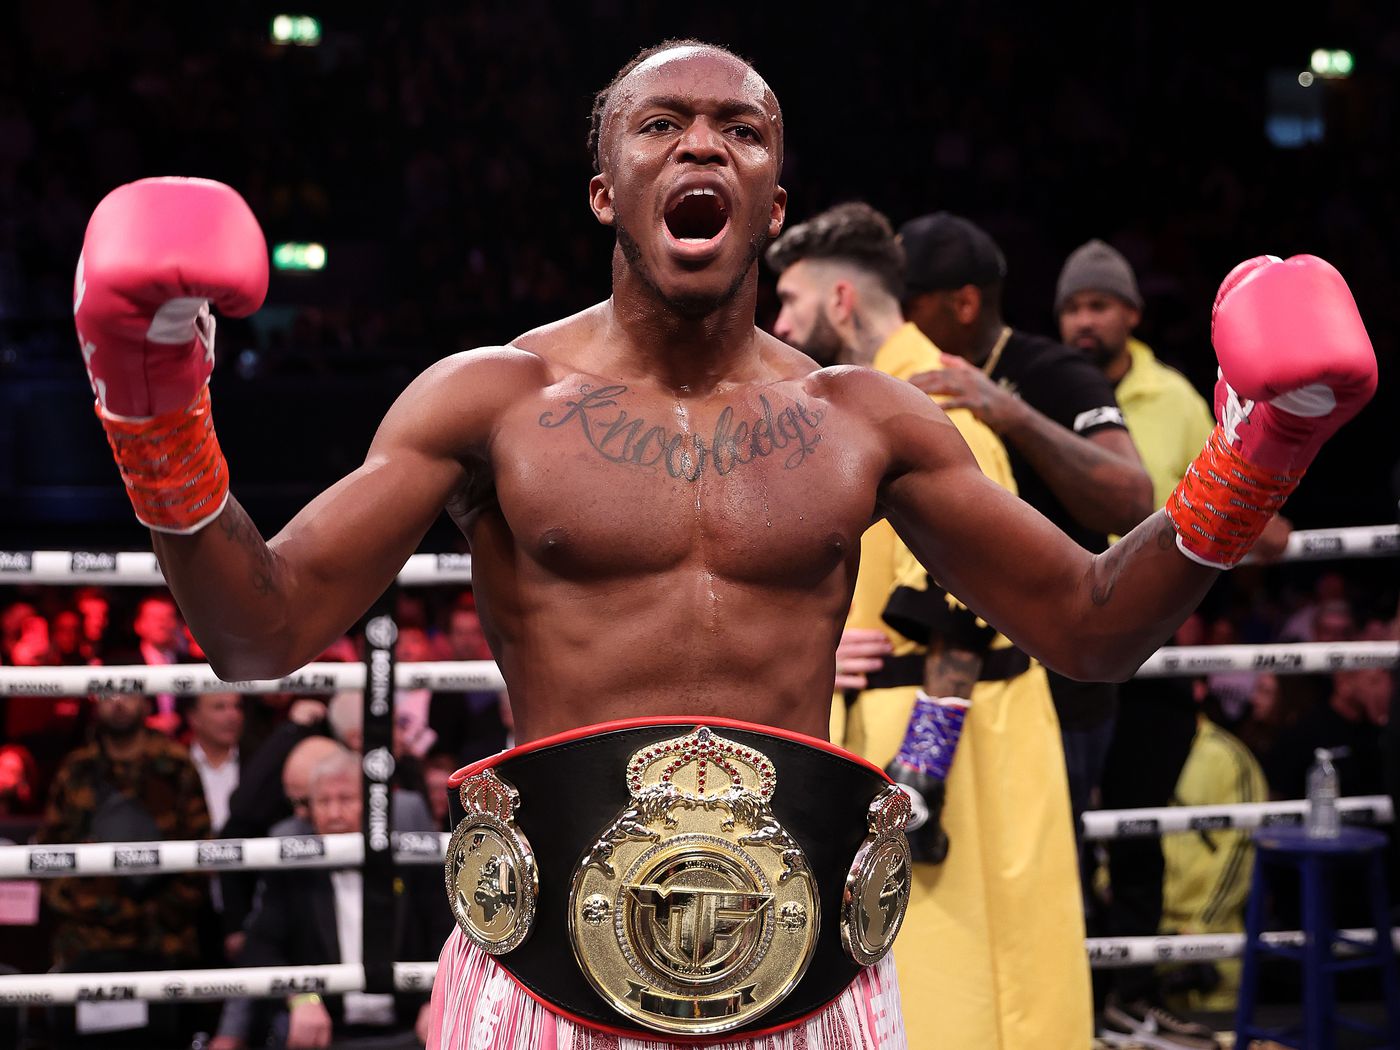 KSI returns to boxing for 2v1 fight against Misfits Boxing champions Anthony Taylor and Slim Albaher